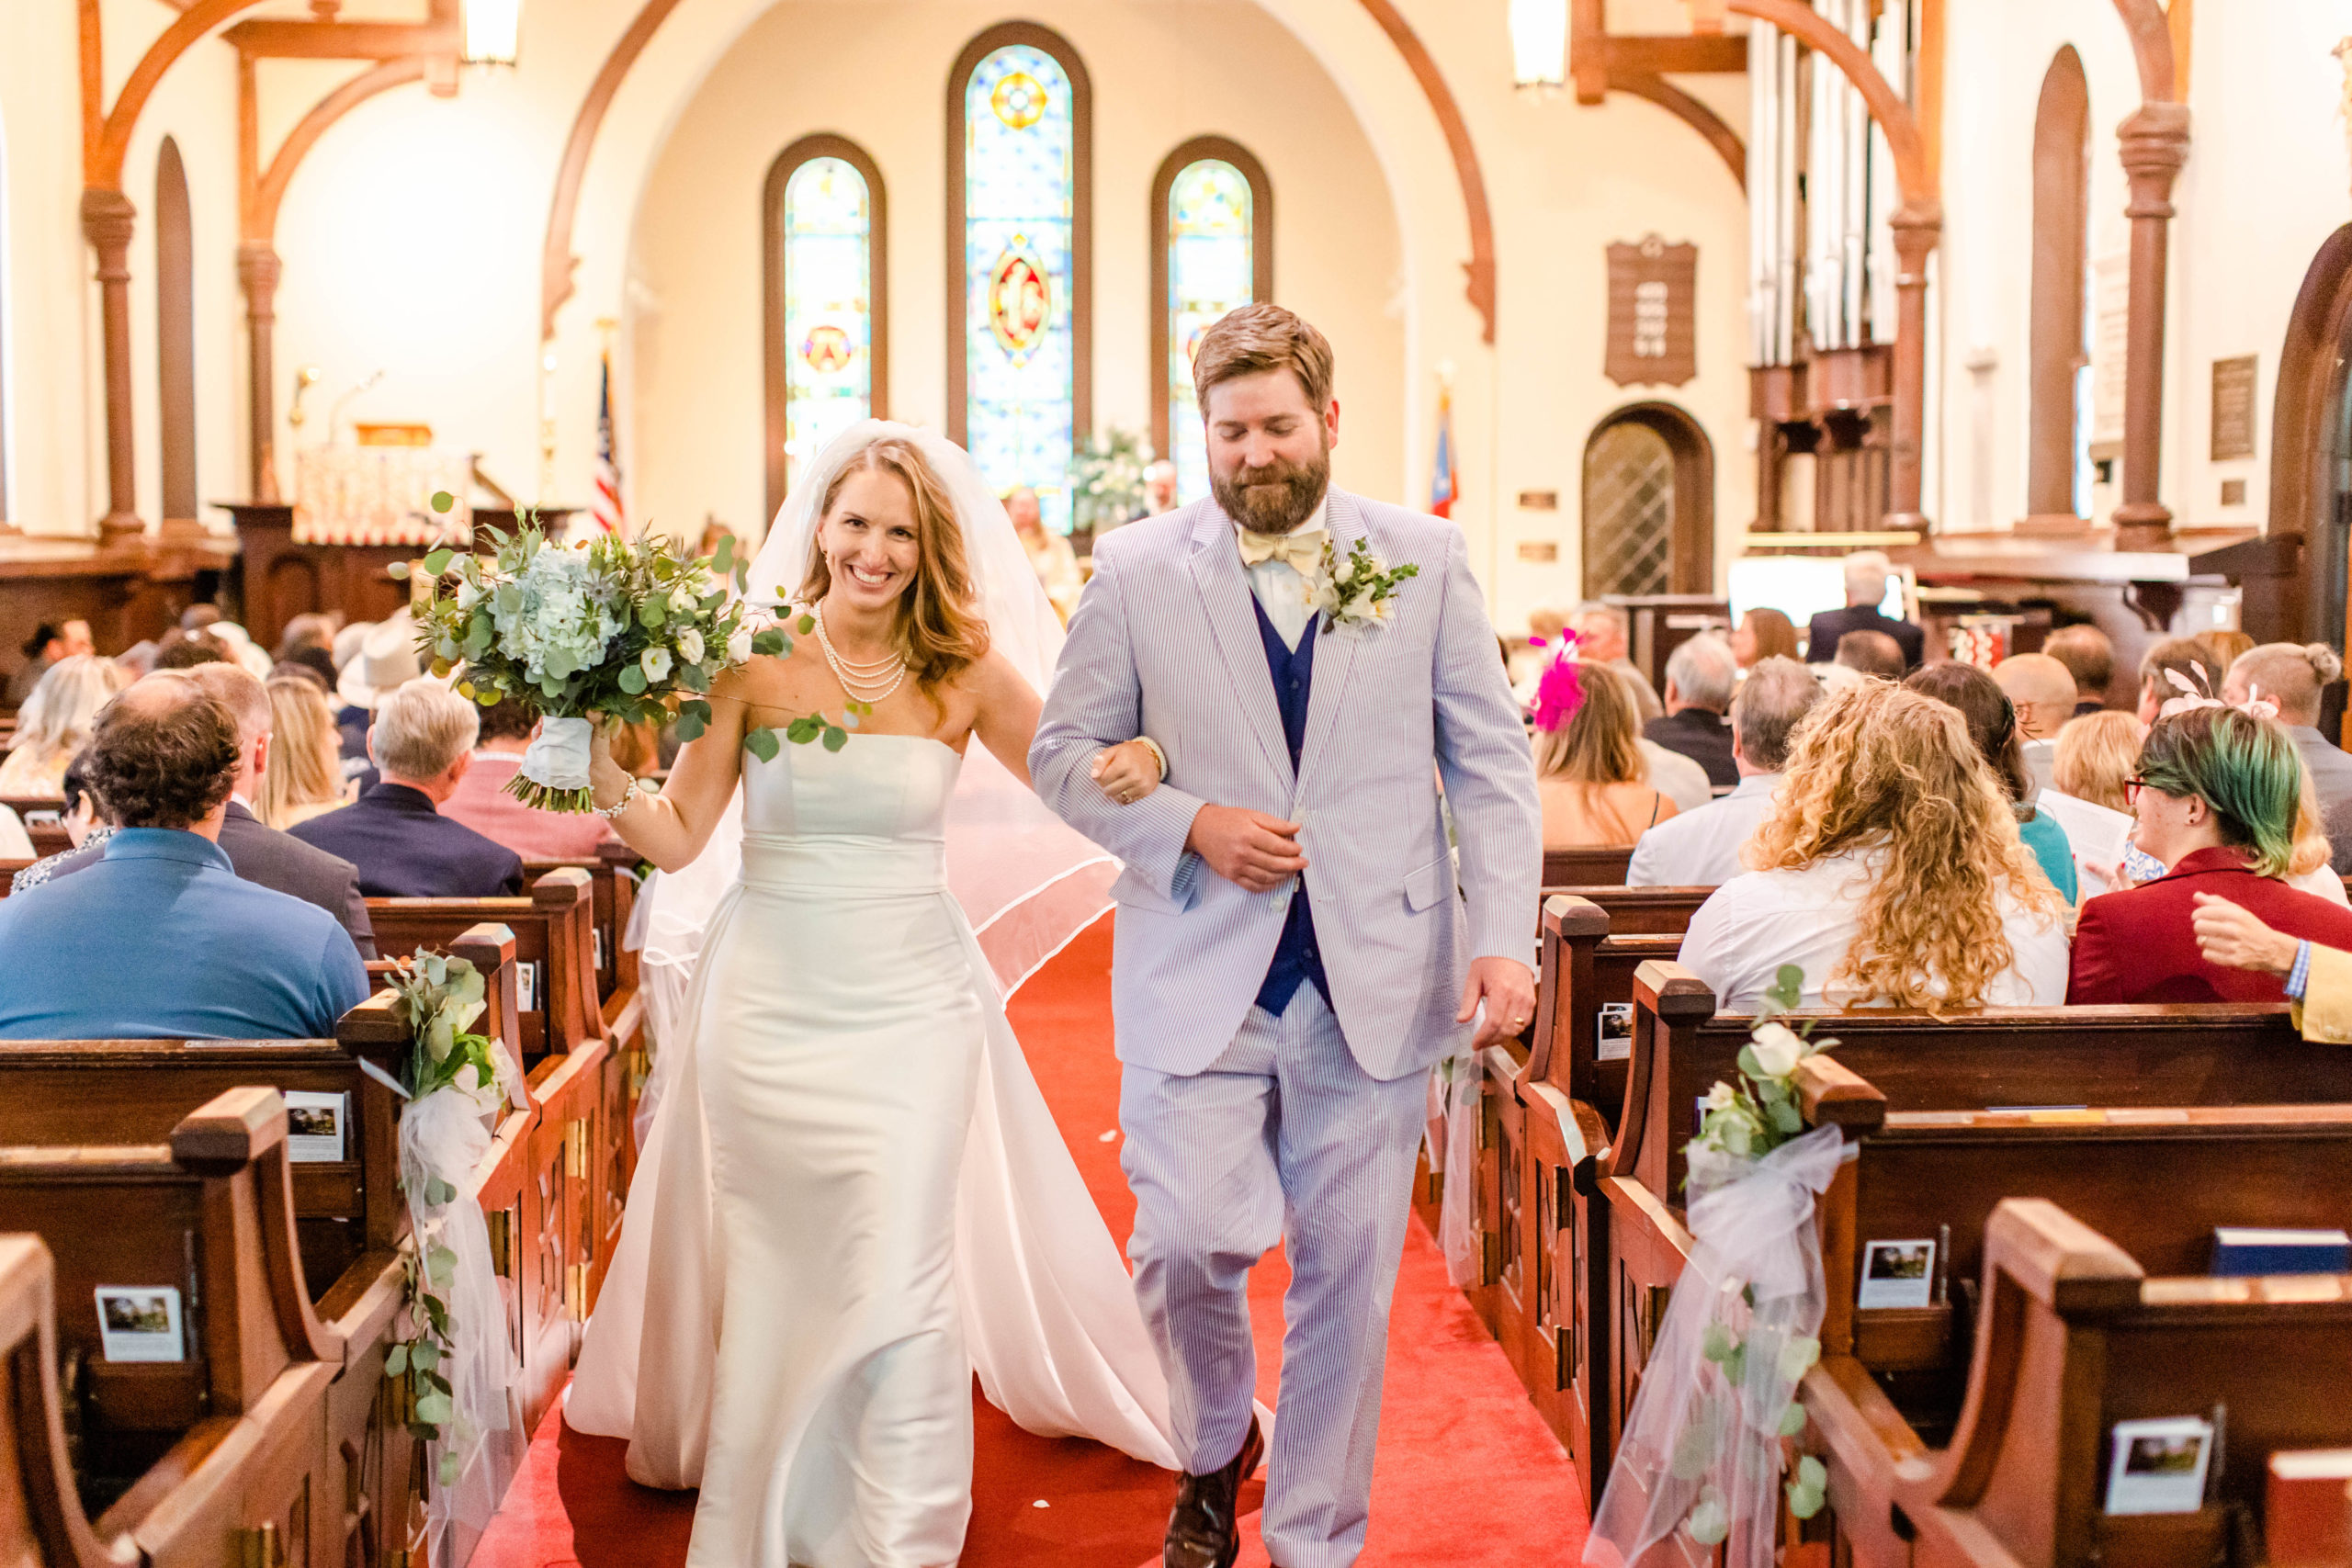 intimate wedding ceremony at St. John's in the Wilderness in Hendersonville, NC